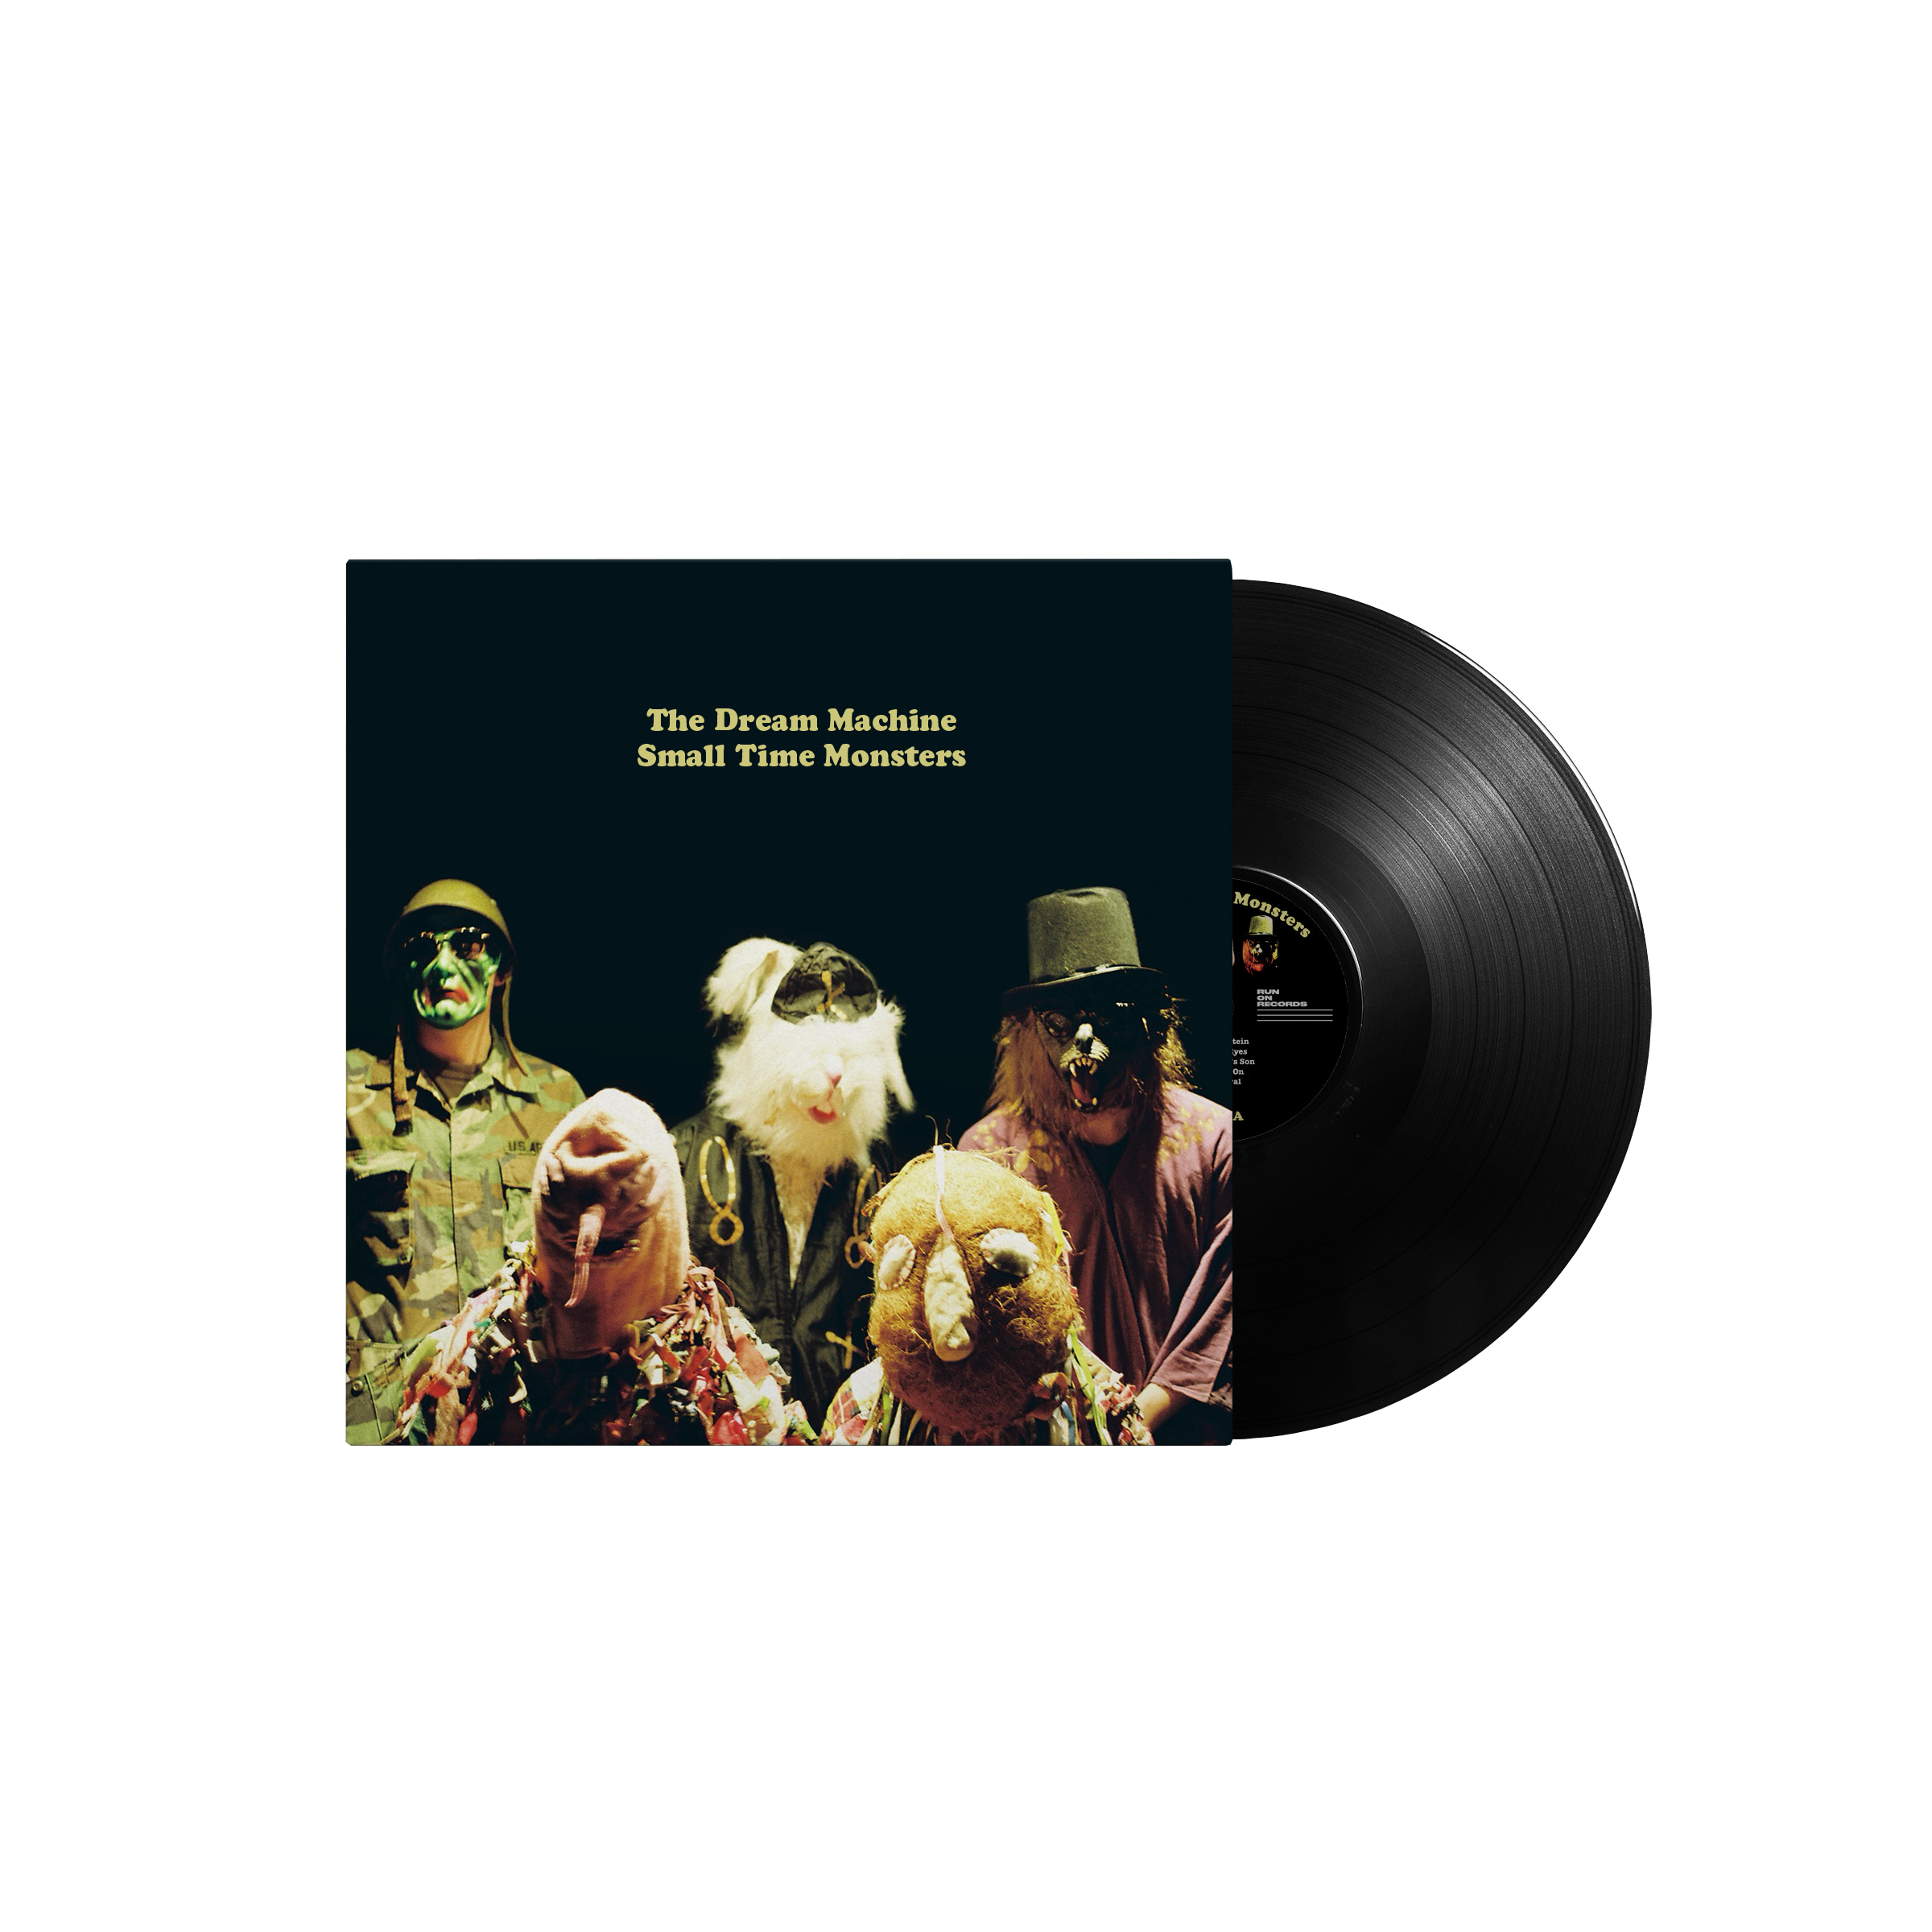 Small Time Monsters: Vinyl LP  + Signed Print